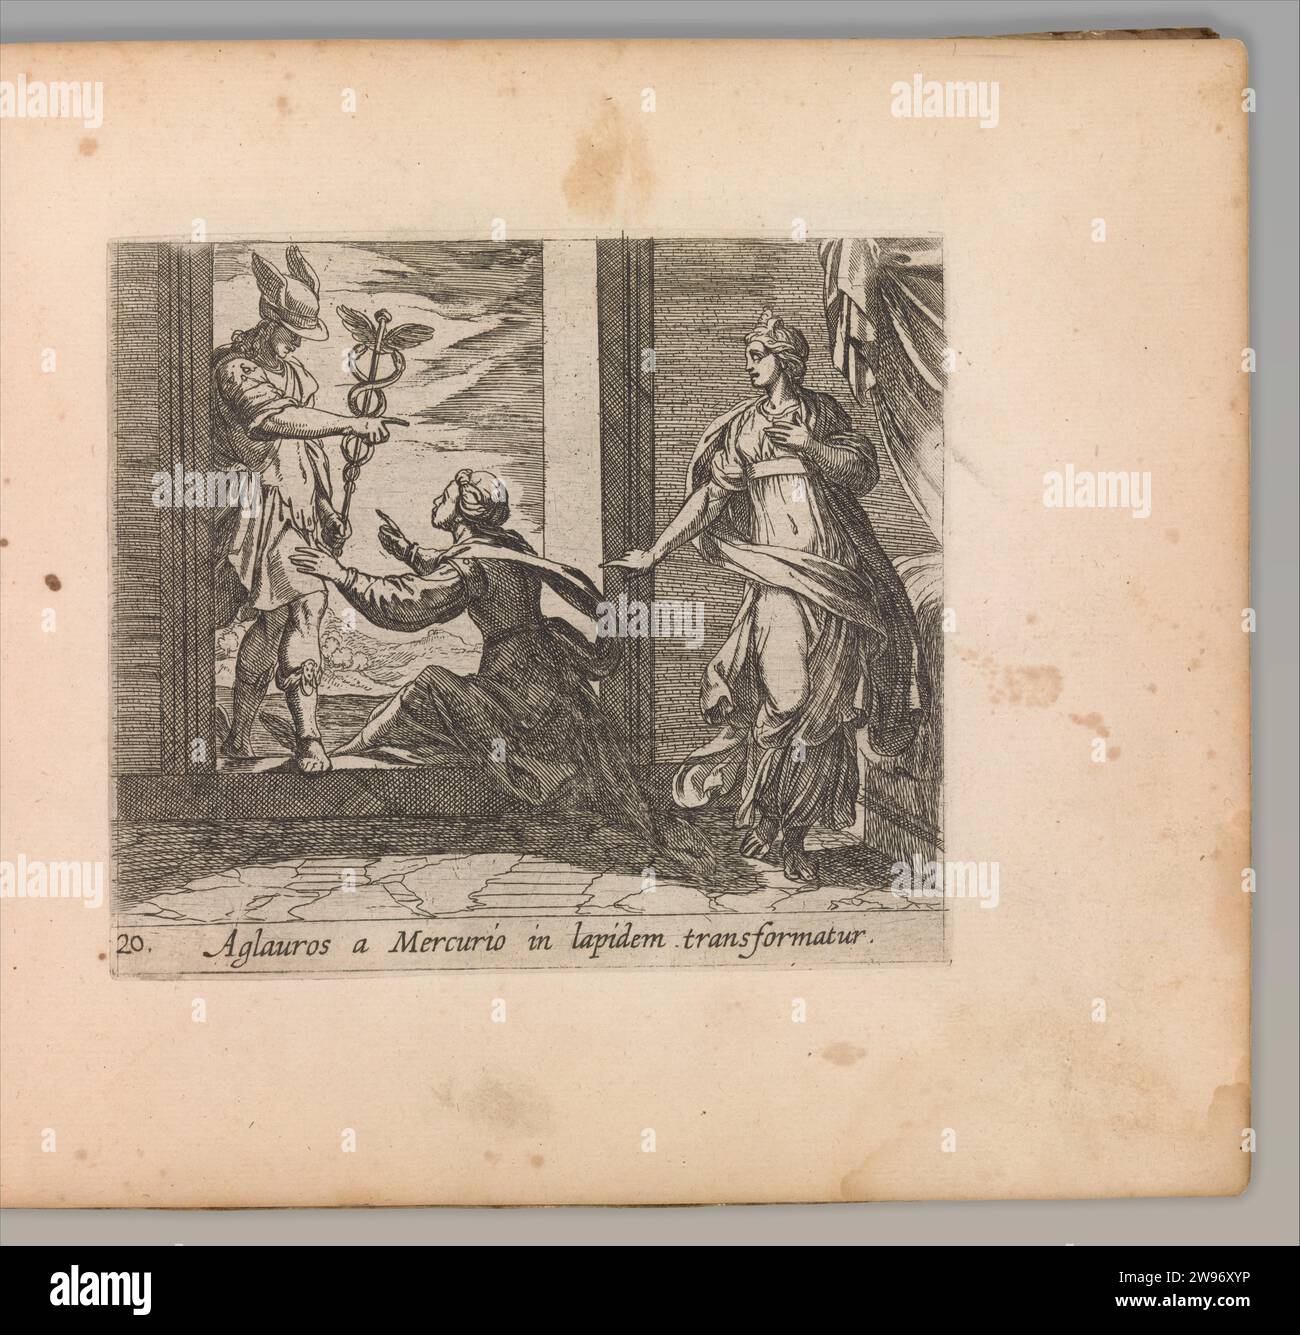 Mercury Turning Aglauros to Stone (Aglauros a Mercurio in lapidem transformatur), from The Metamorphoses of Ovid (Metamorphosean Sive Transformationum), plate 20 1935 by Willem Jansz. Stock Photo